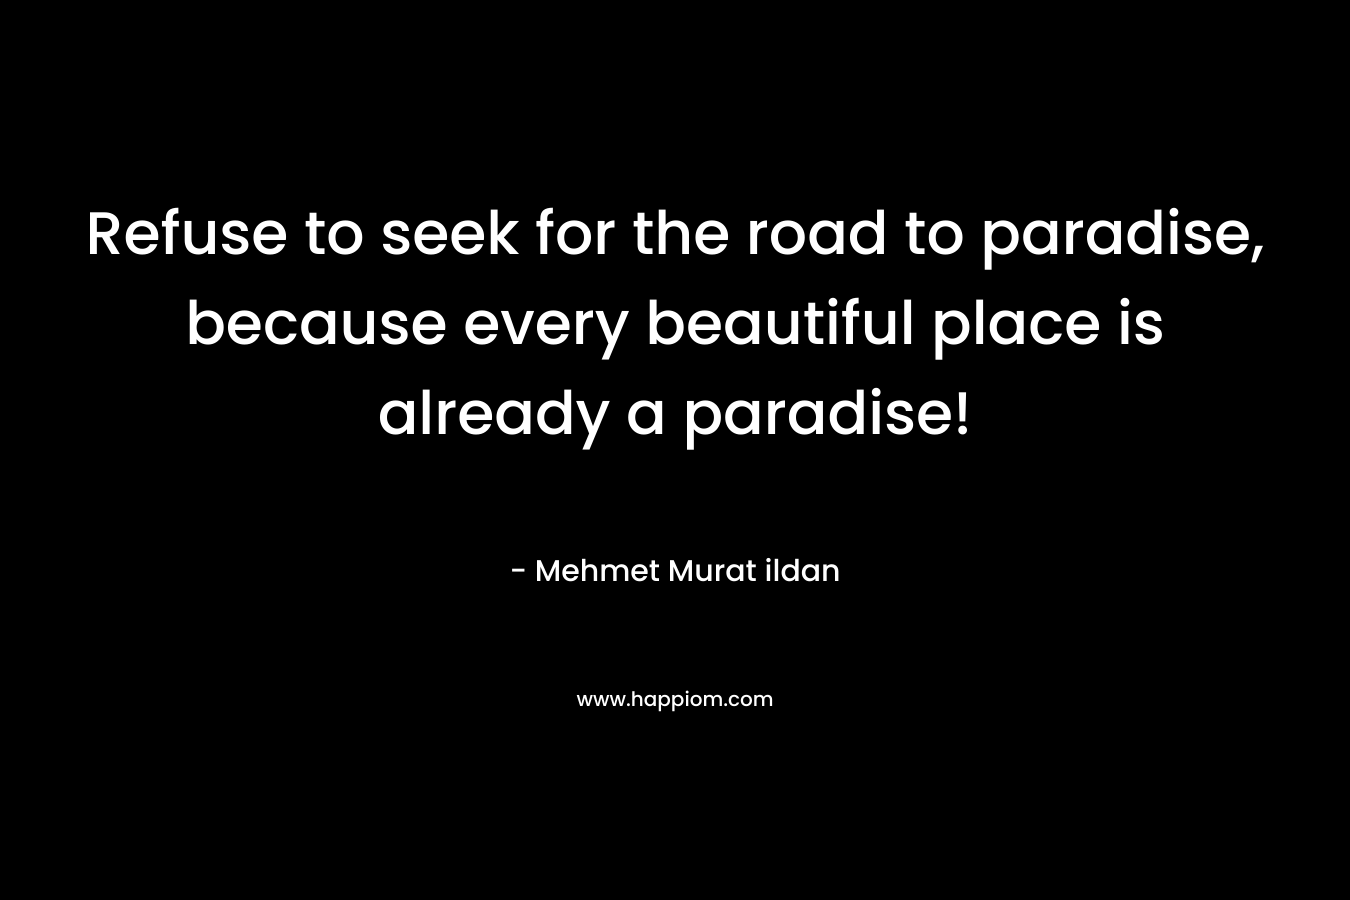 Refuse to seek for the road to paradise, because every beautiful place is already a paradise! – Mehmet Murat ildan